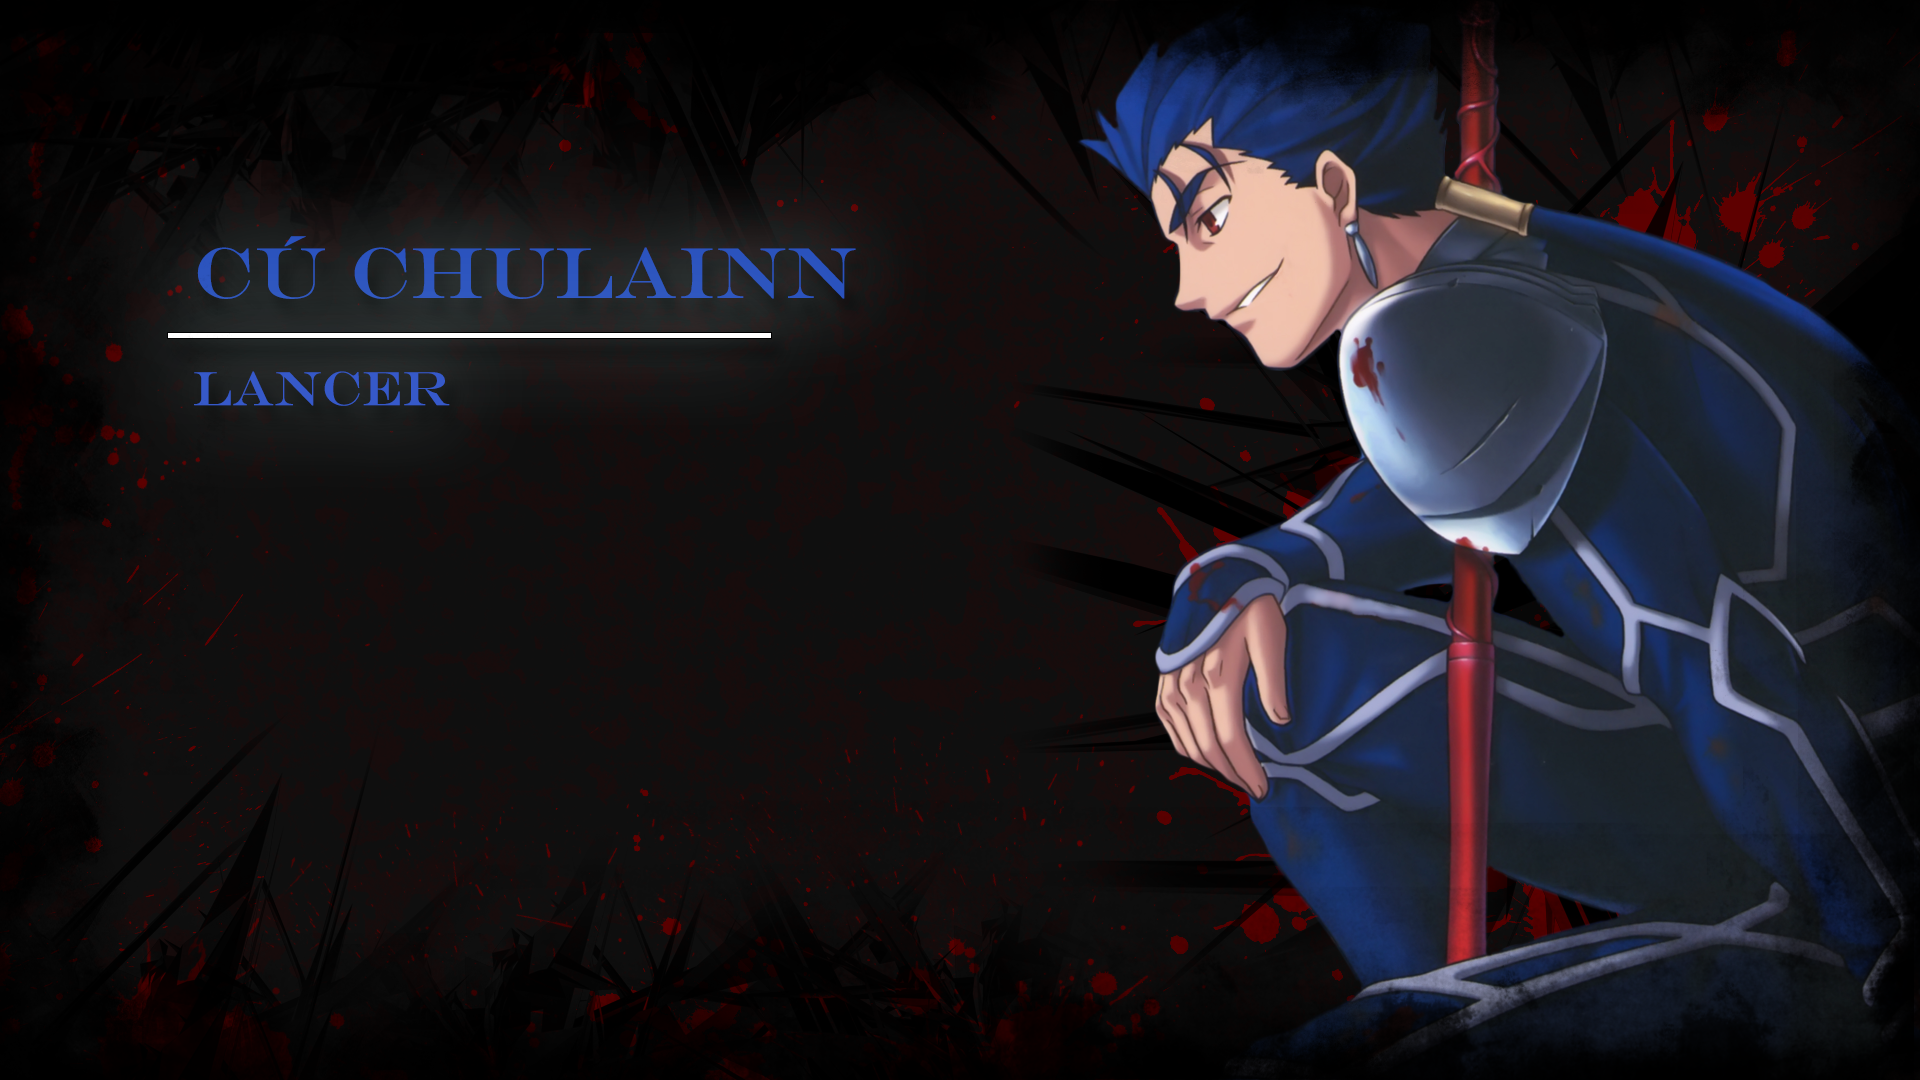 Fate/stay night Fate/Grand Order Lancer Fate/Zero Anime, Anime, cg Artwork,  black Hair, video Game png | PNGWing